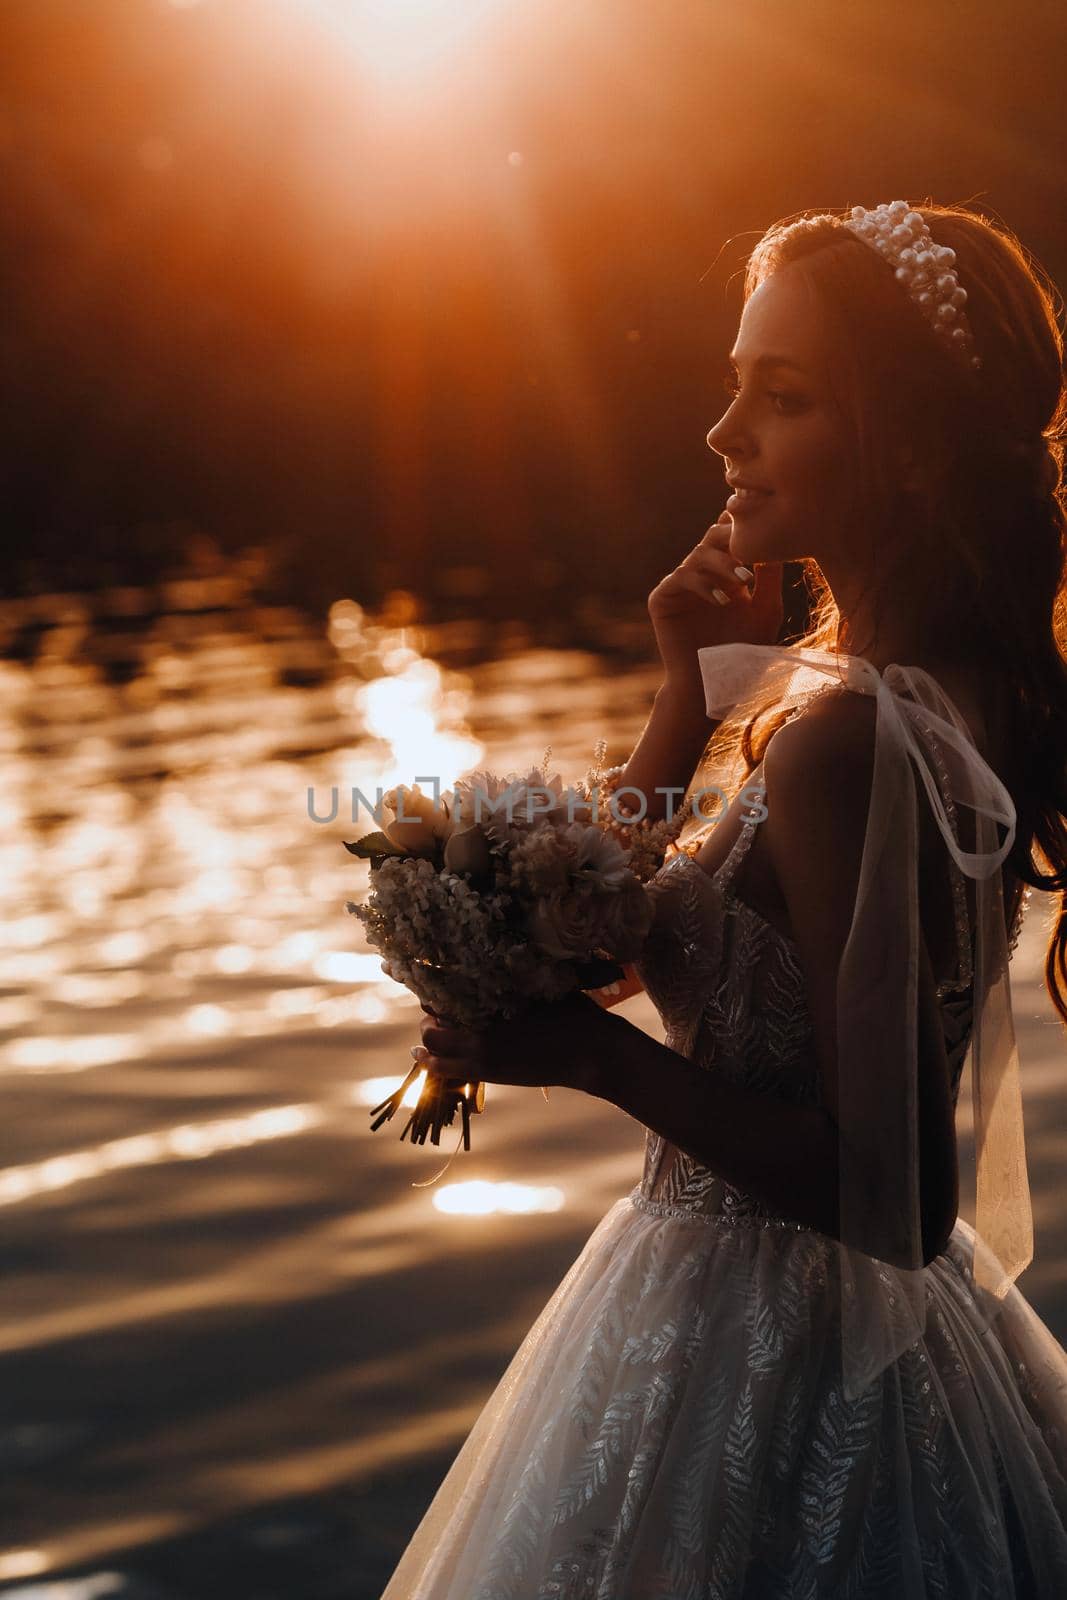 An elegant bride in a white dress and gloves stands by the river in the Park with a bouquet, enjoying nature at sunset.A model in a wedding dress and gloves in a nature Park.Belarus.